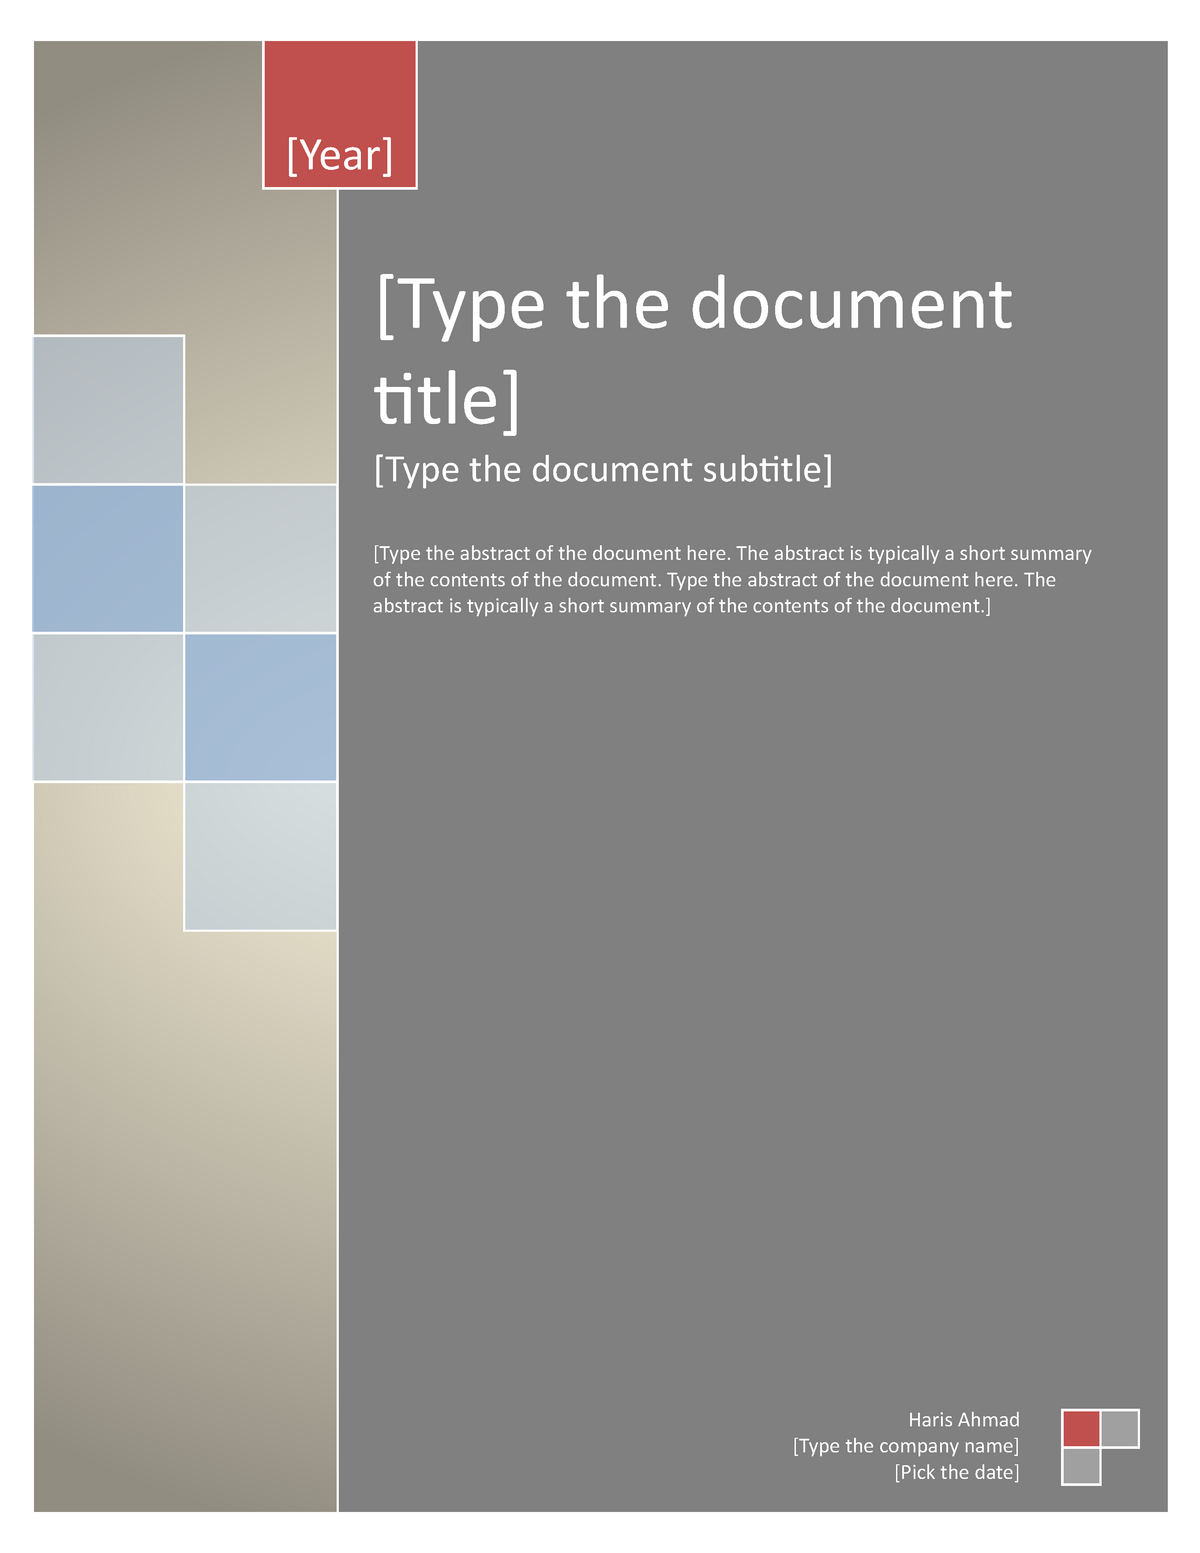 1 austax 1 - assignment 1 - [Type the document title] [Type the ...